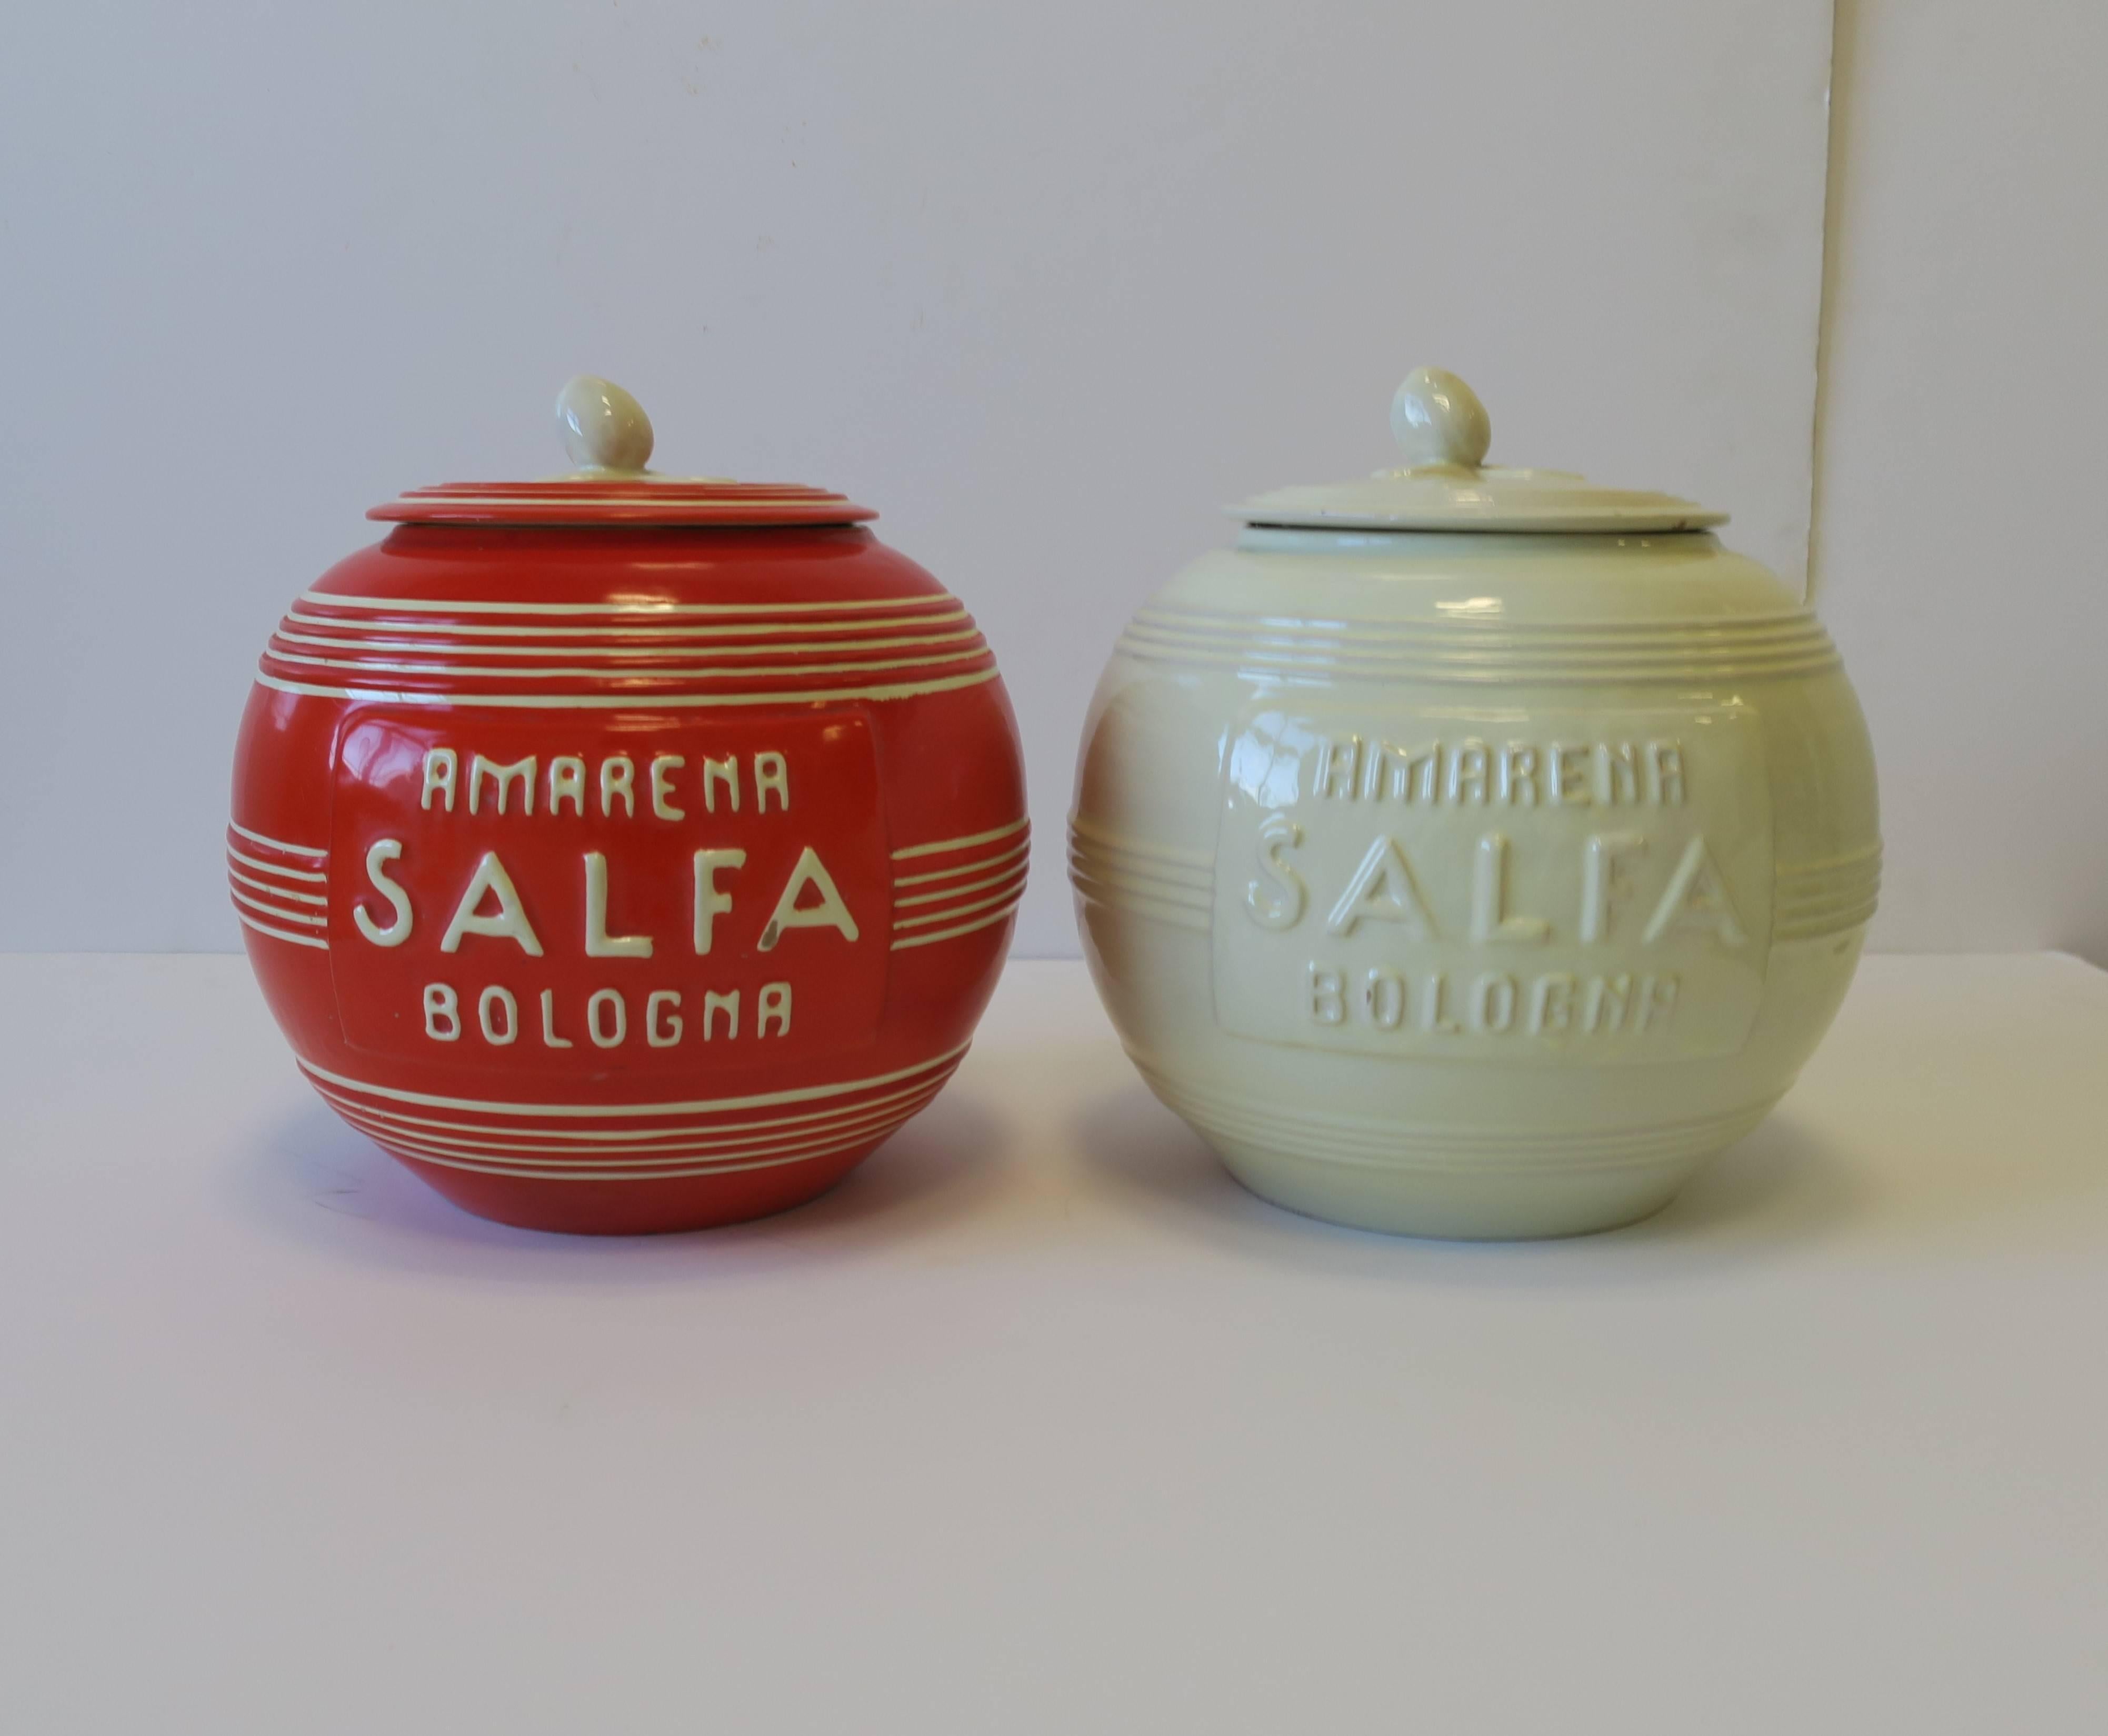 A beautiful set of two (2) Italian Modern Art Deco period pottery jars/vessels, circa 1930s, Italy. Copy/text reads: AMARENA SALFA BOLOGNA. One is designed in a beautiful orange hue with cream or off-white accent color, and the other a solid cream